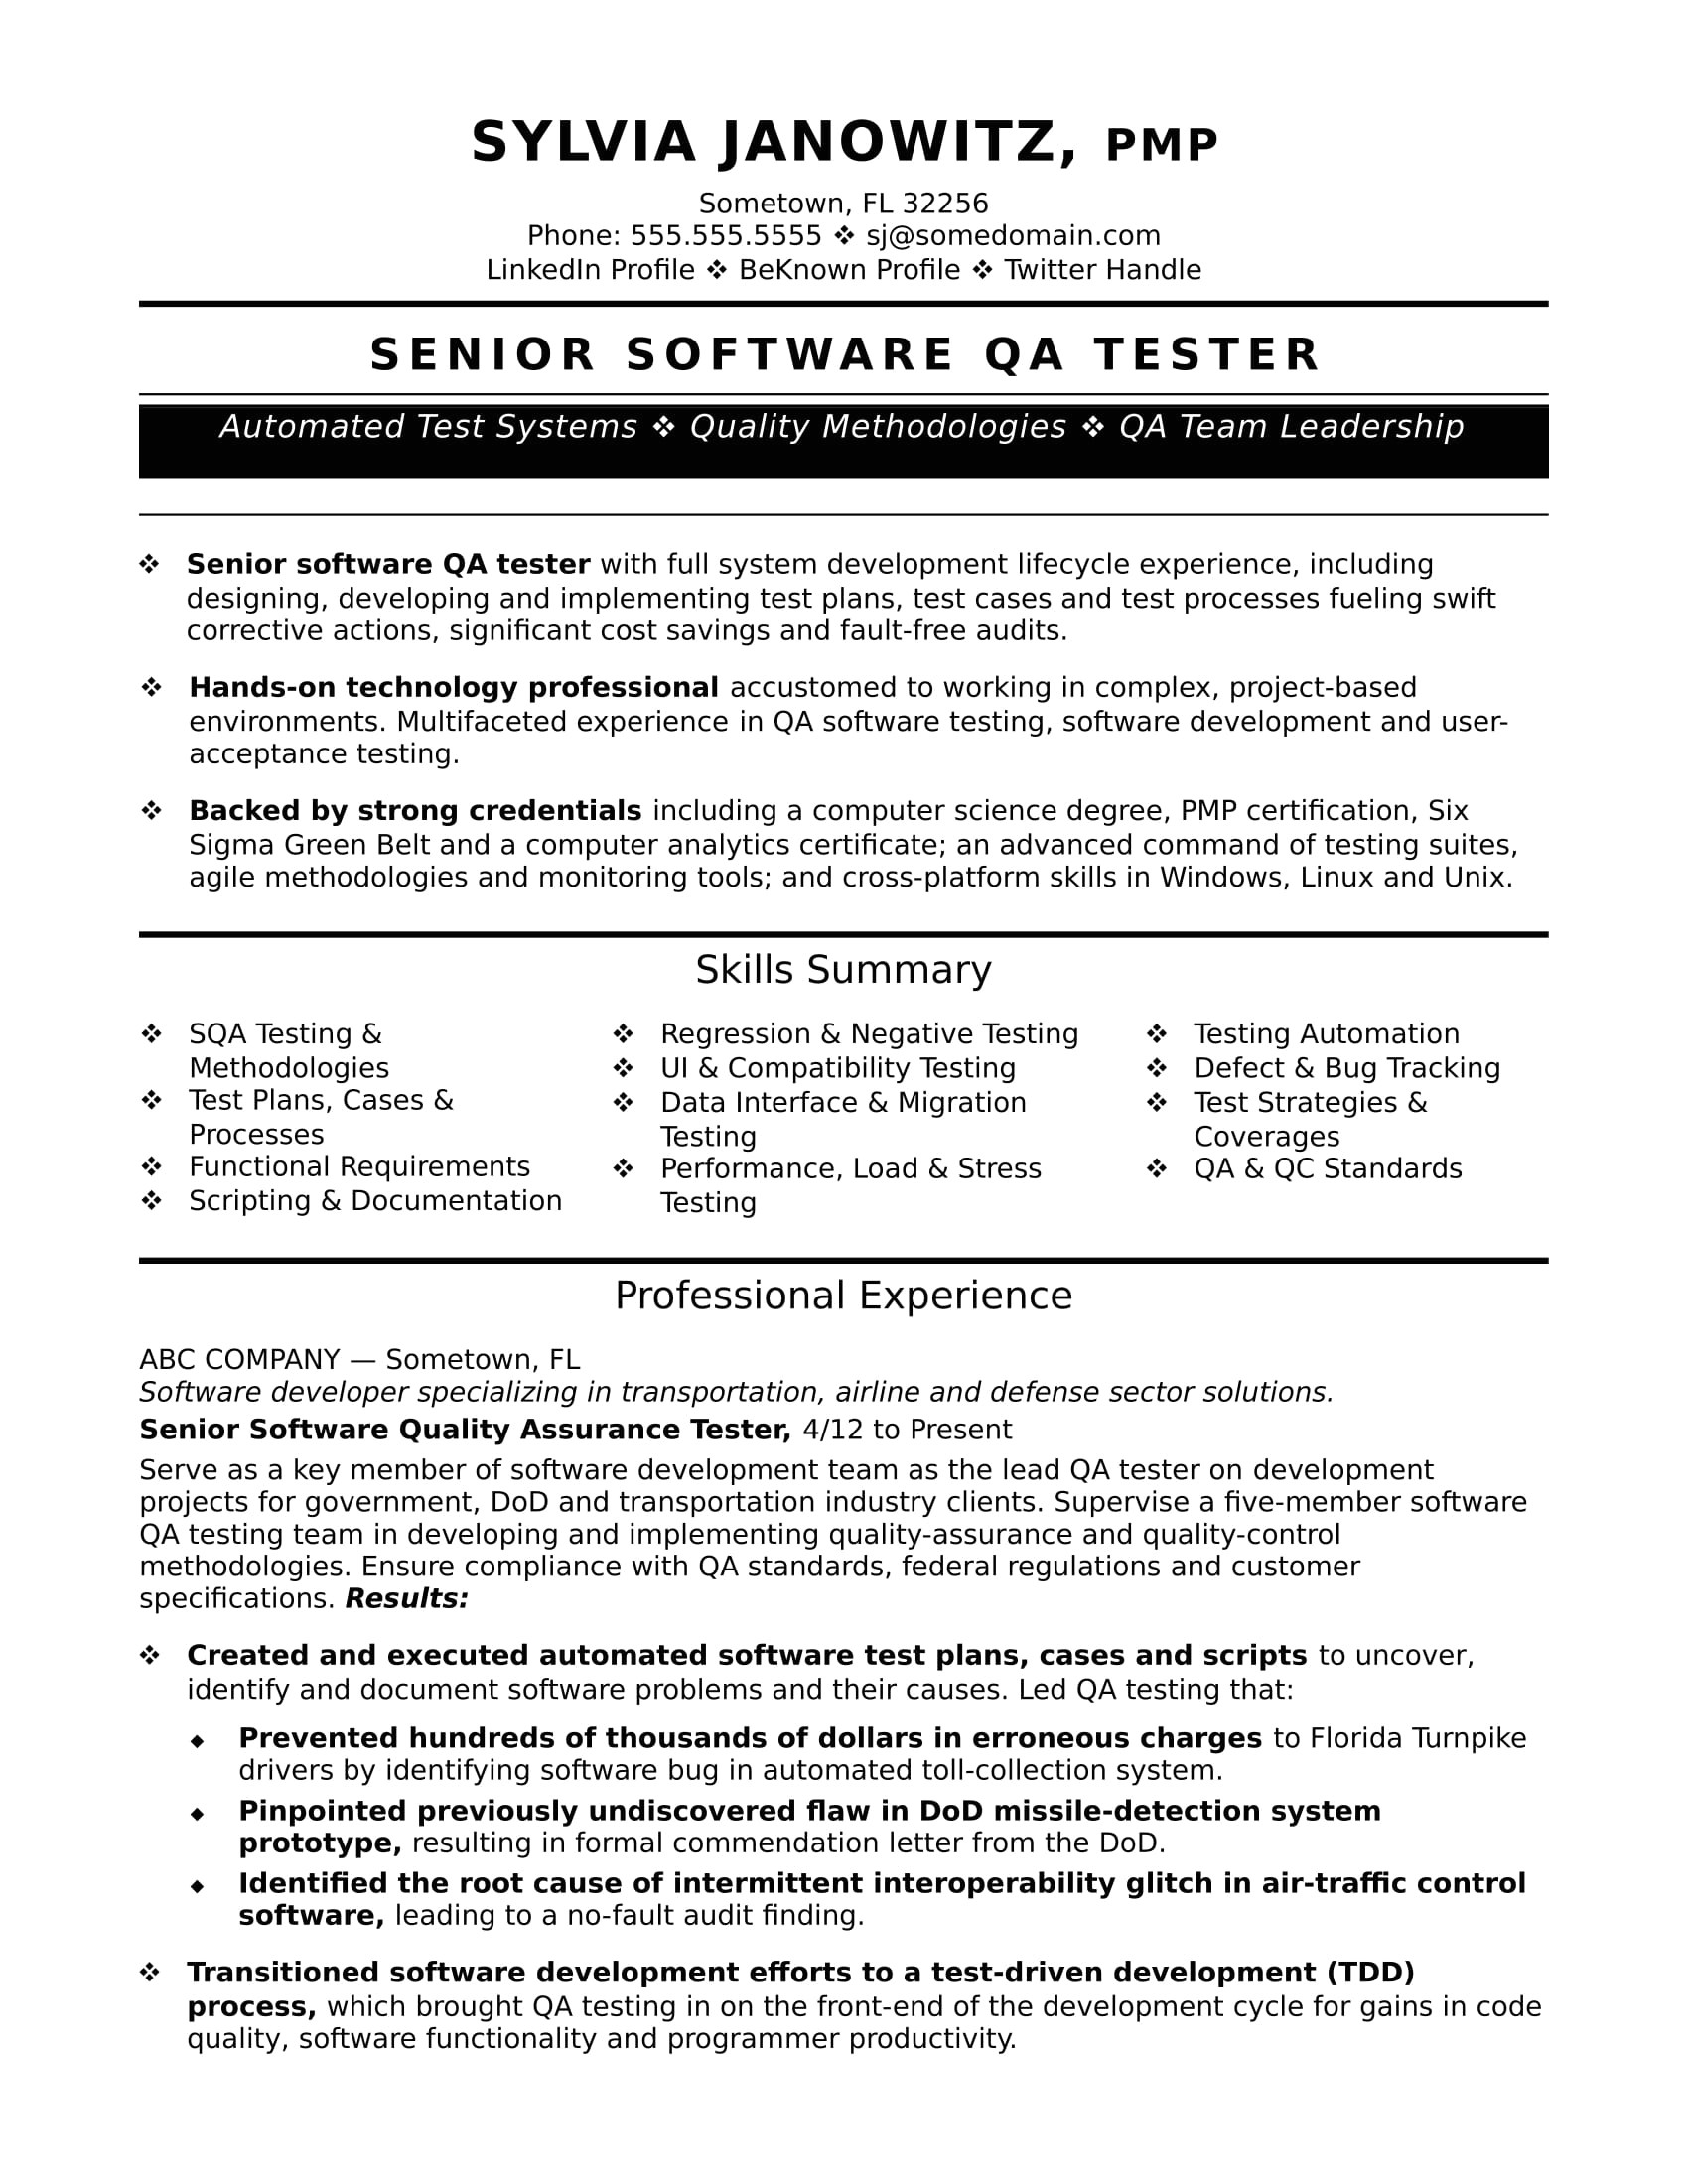 sample resume qa software tester experienced